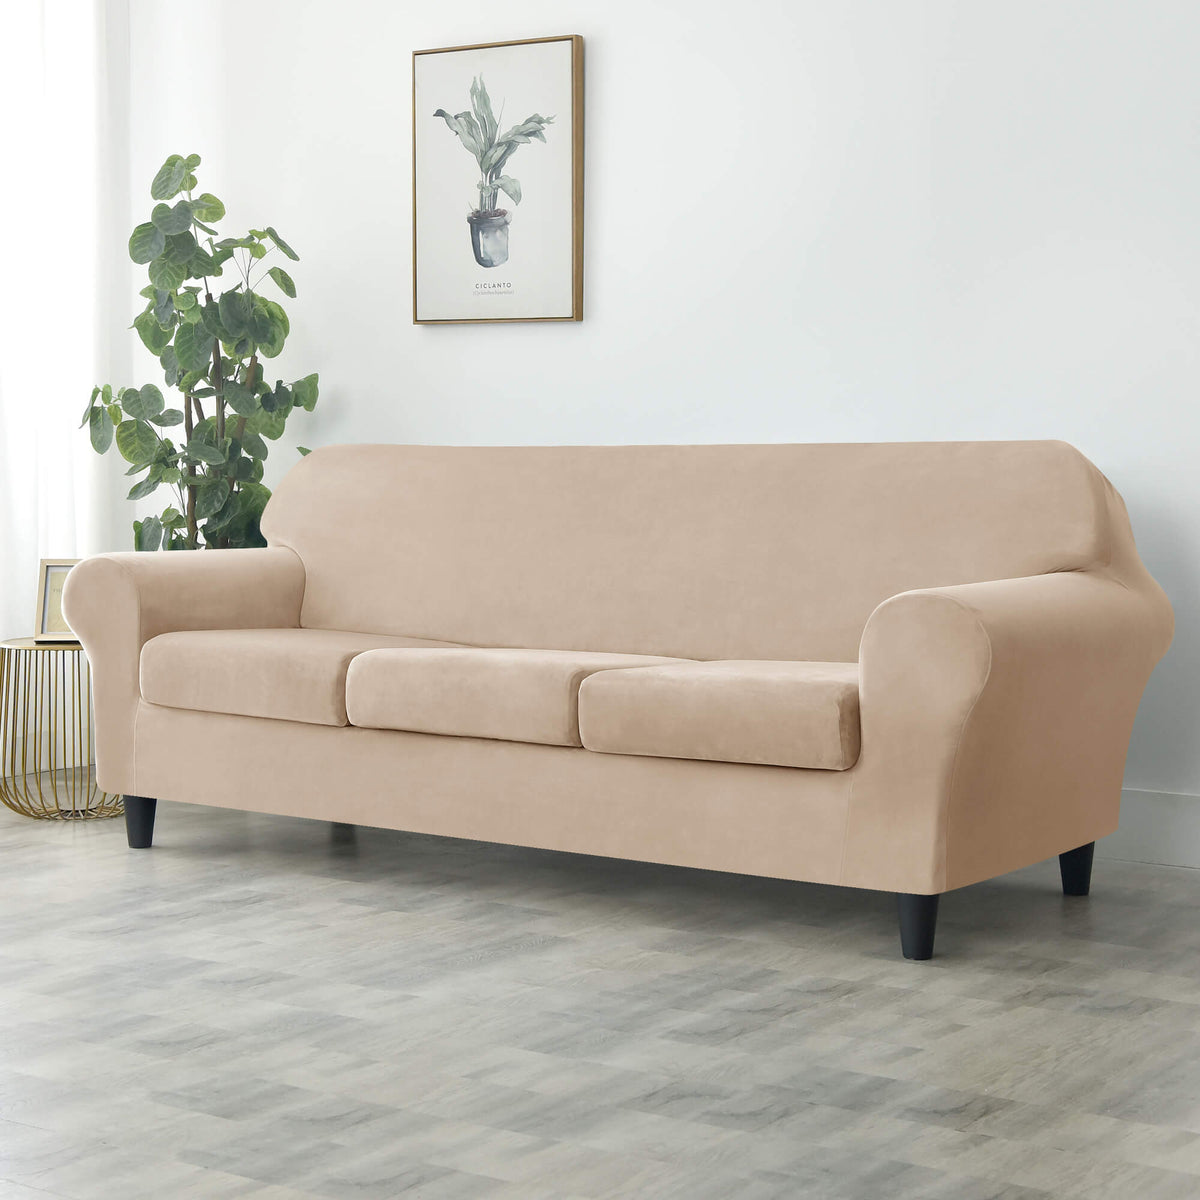 Crfatop Modern Couch Cover Stretch Armchair Sofa Seat Slipcovers with Elastic Bottom 3-seaterBeige